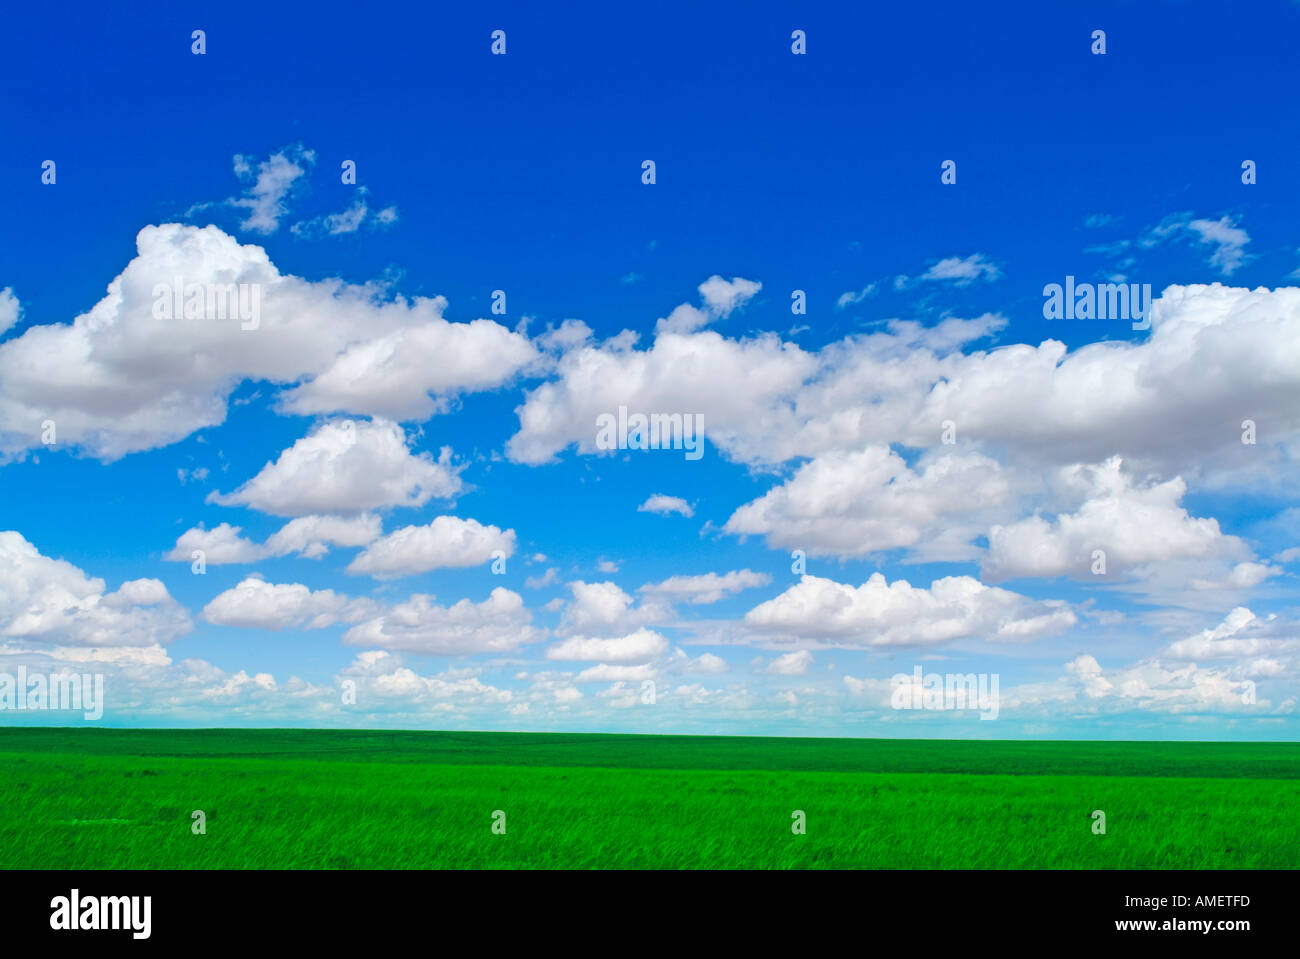 Green Grass Blue Sky And White Clouds Background Depicting Wide Open Stock Photo Alamy